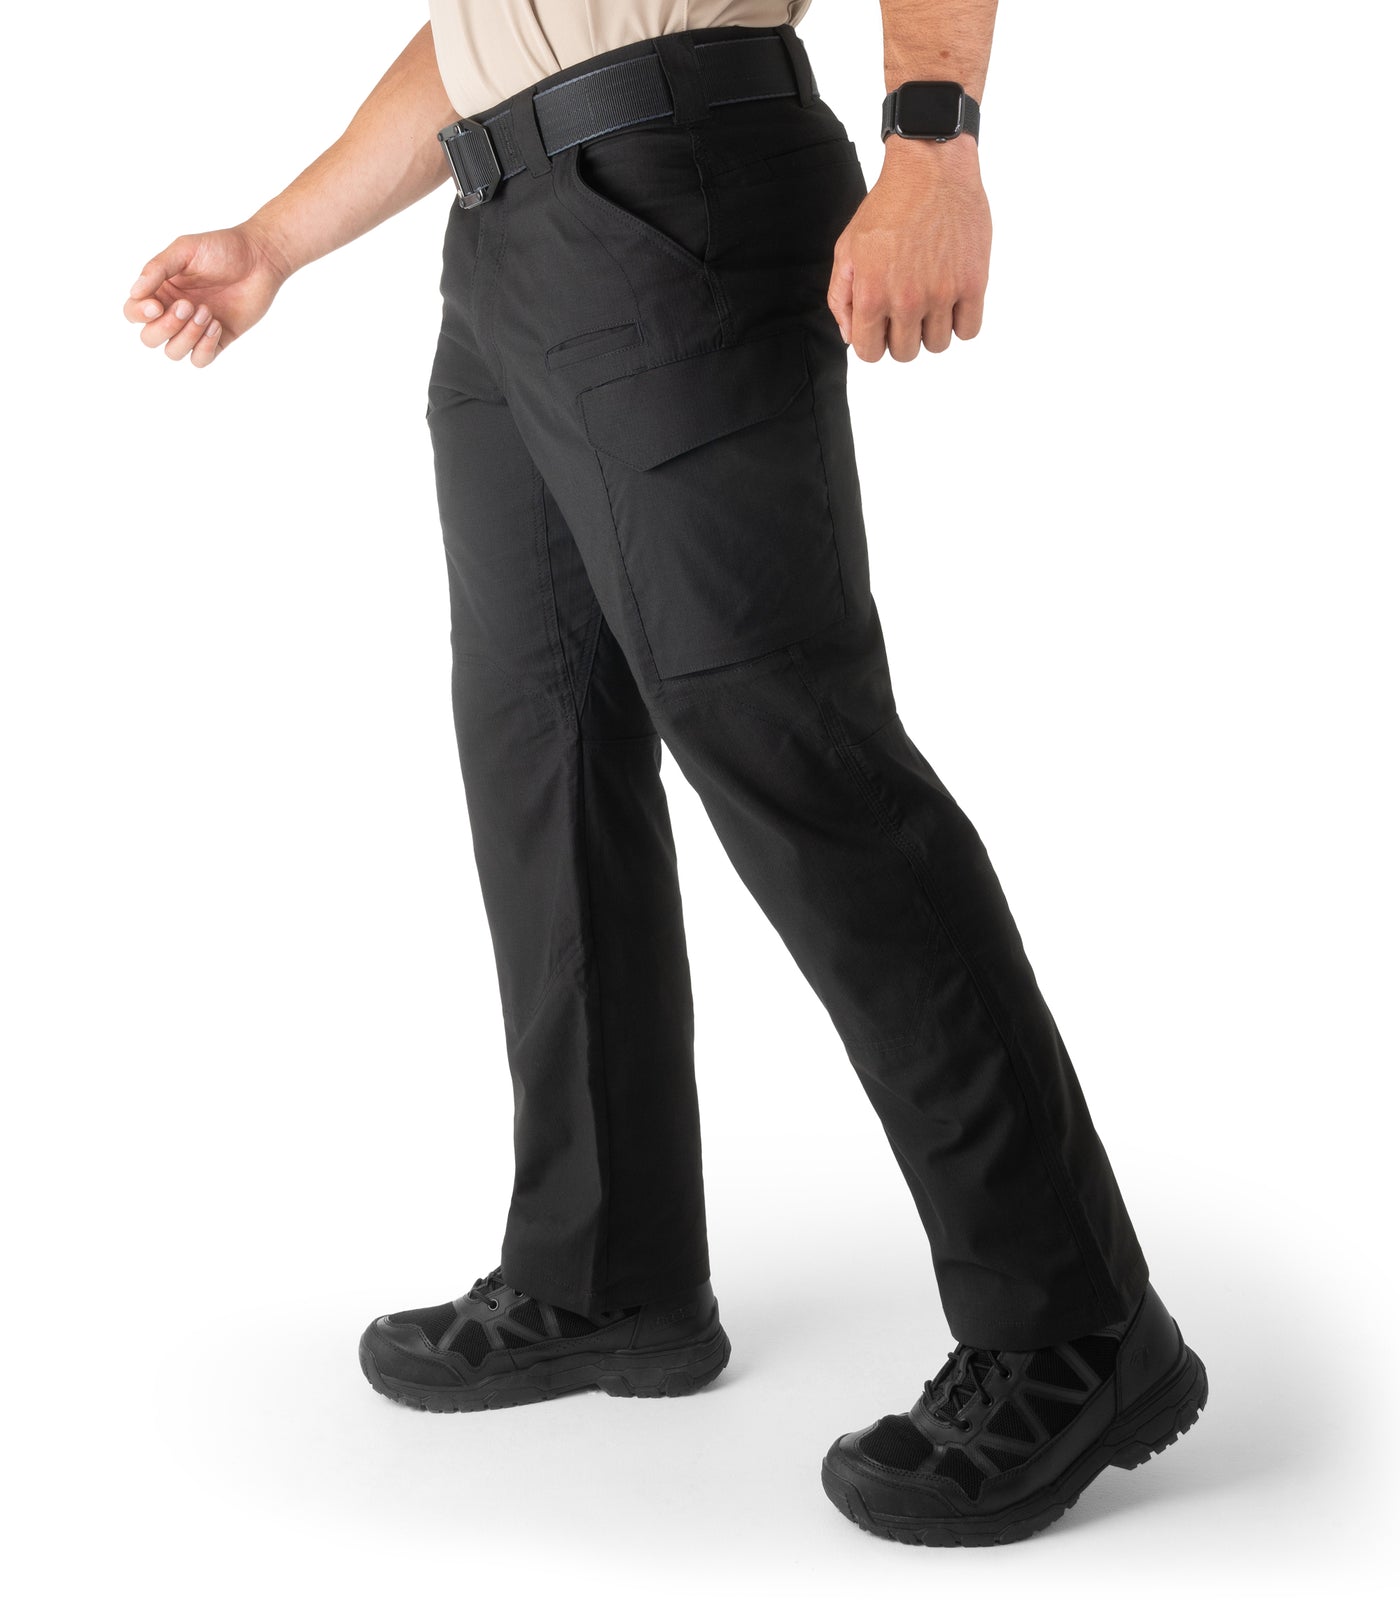 The V2 Tactical Pant – First Tactical